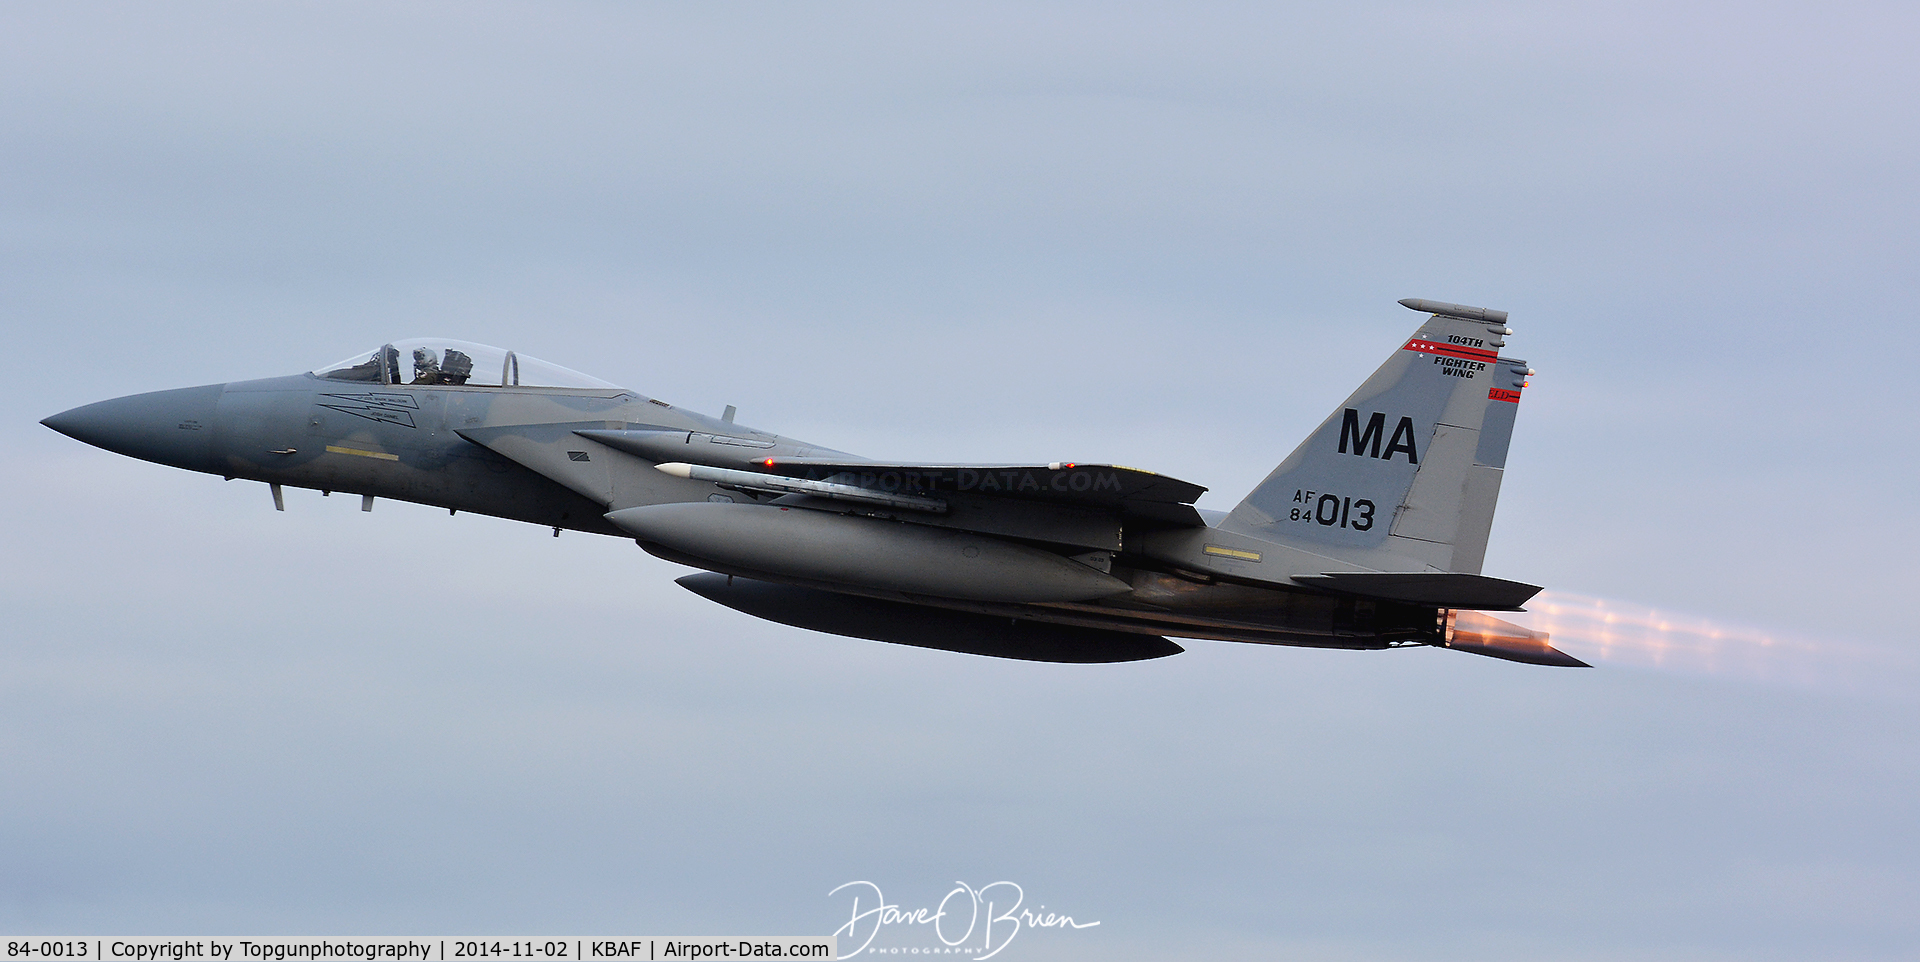 84-0013, 1984 McDonnell Douglas F-15C Eagle C/N 0922/C316, WICKED32 off in afterburners